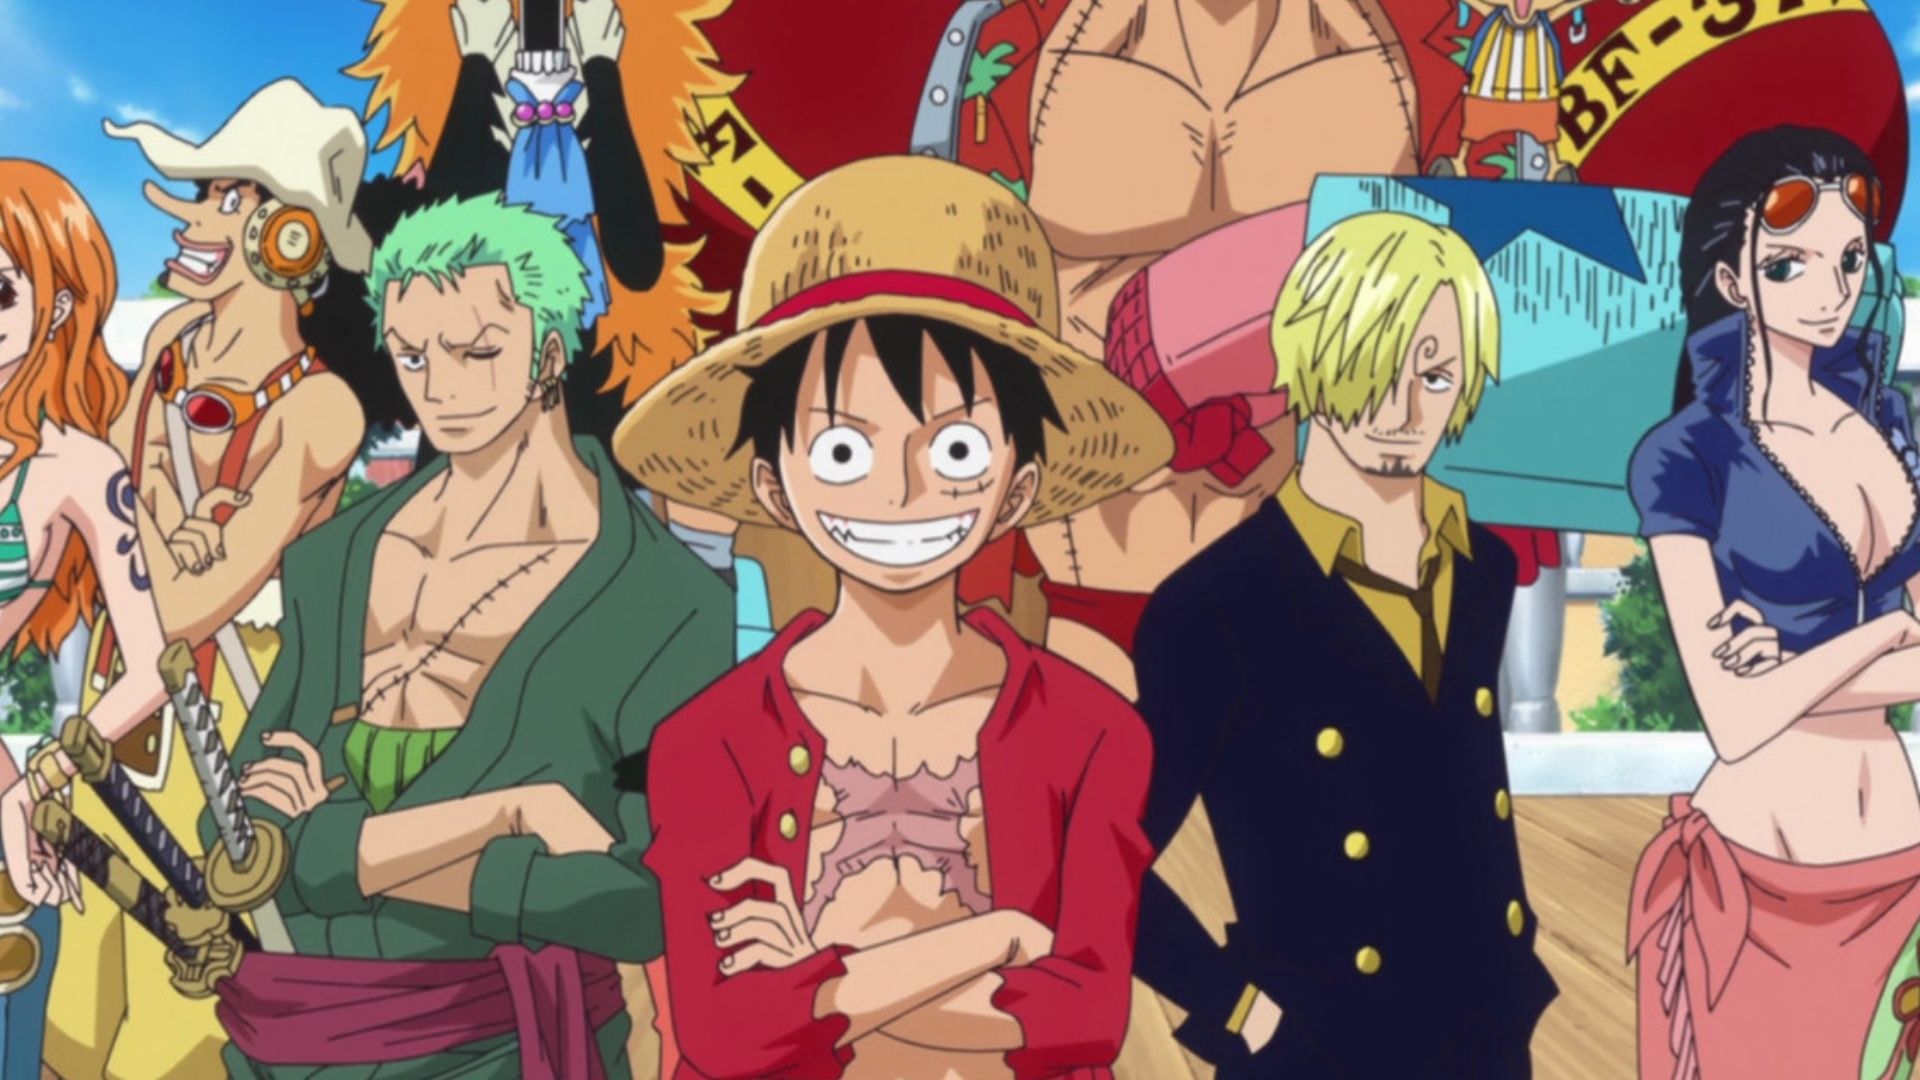 Toonami Welcomes Back One Piece Anime